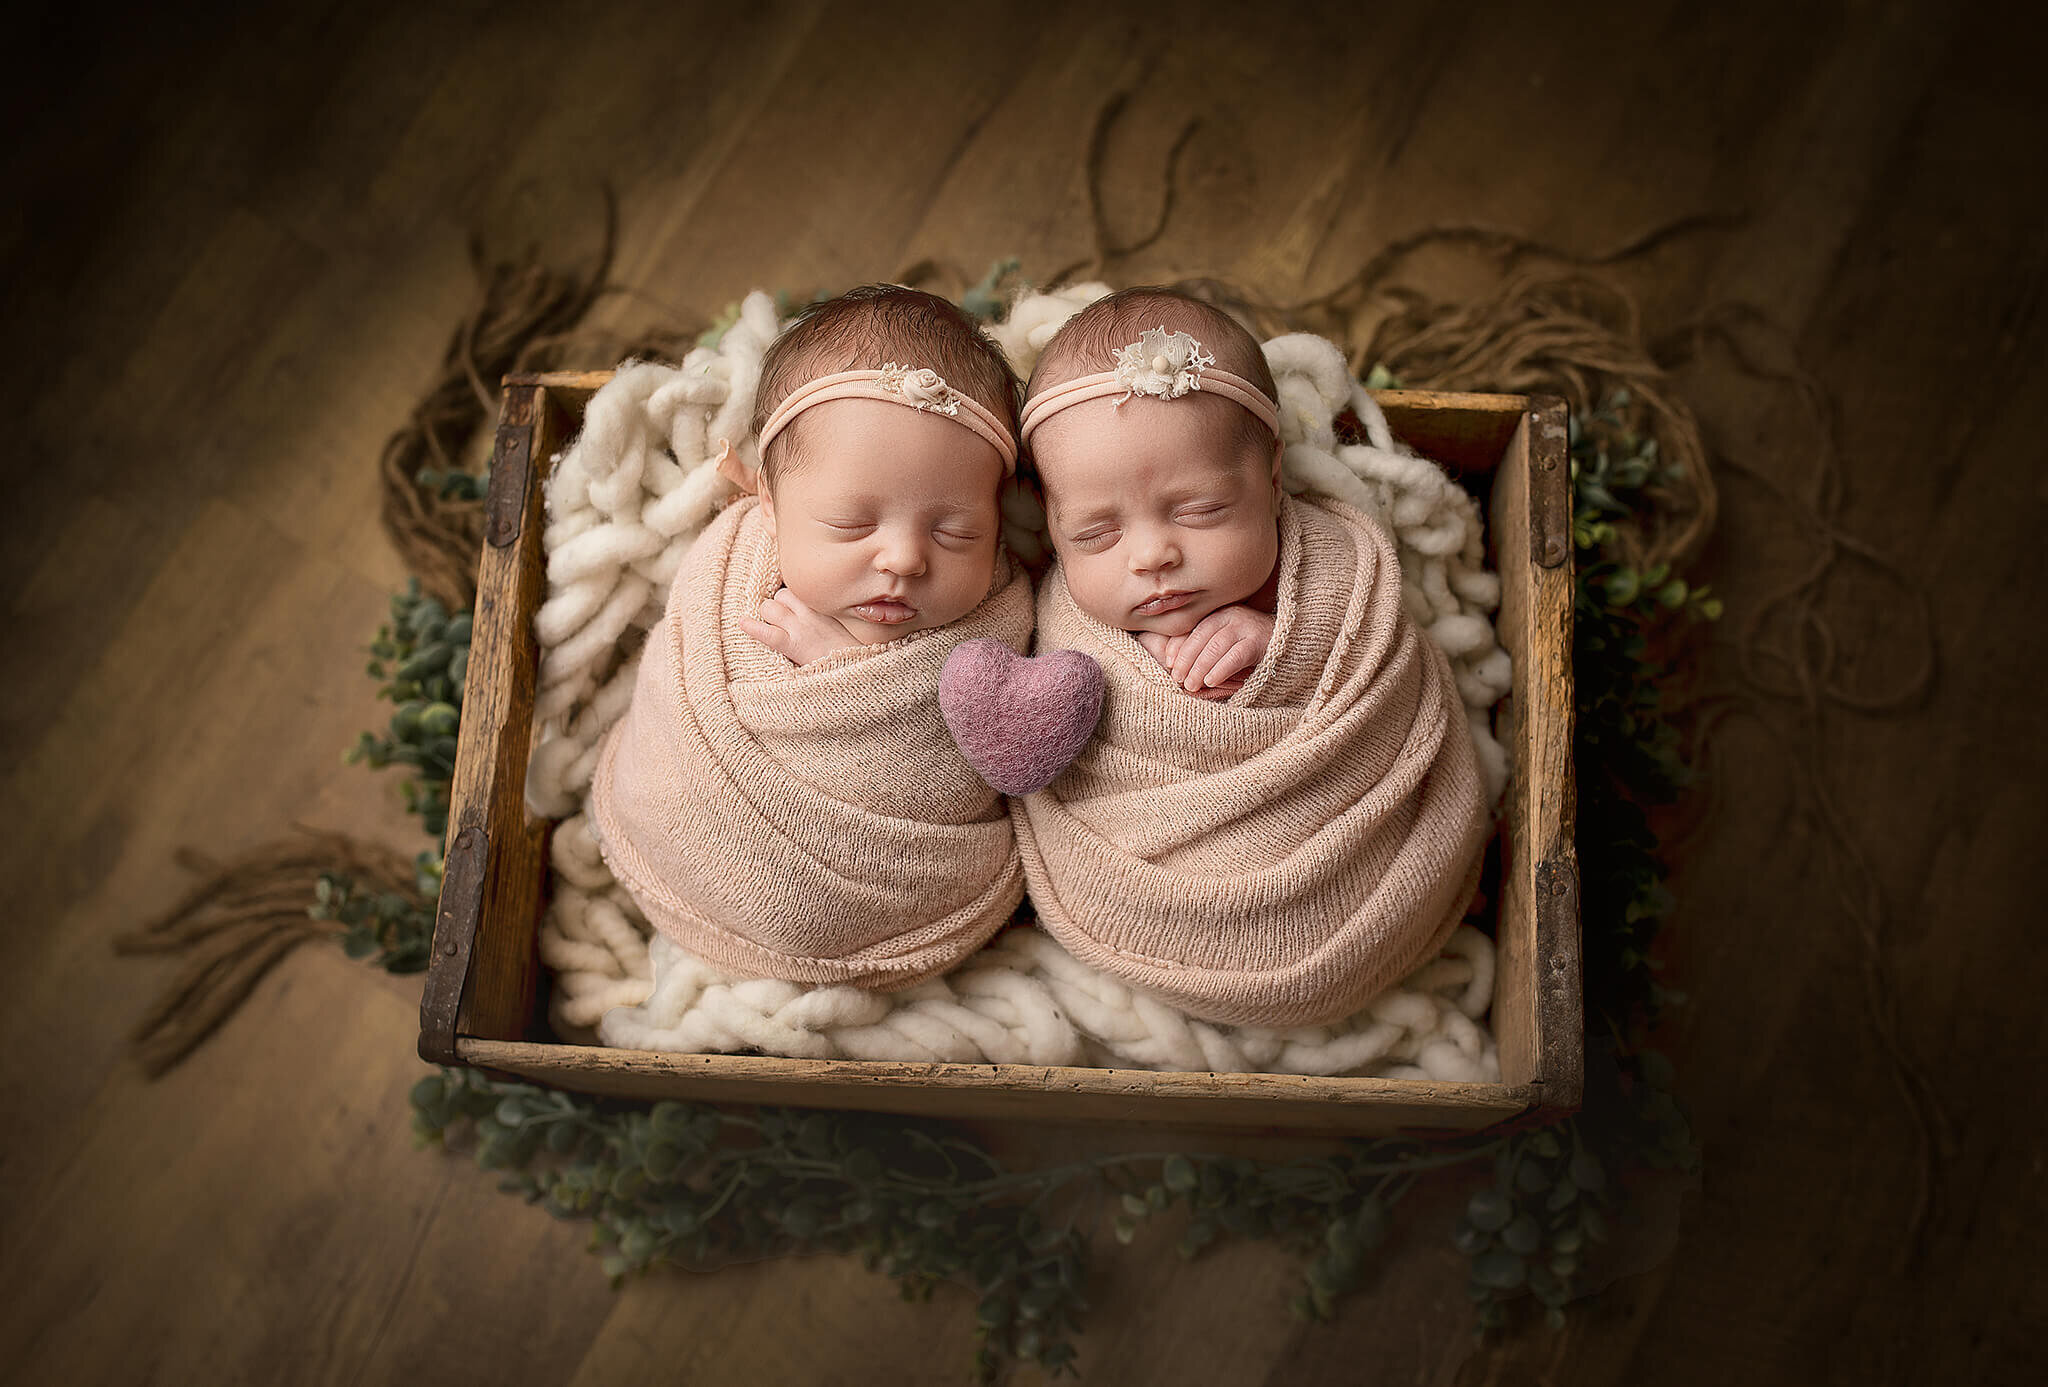 Twin girls  wrapped and placed a box next to each other with a little stuffed heart in between them.